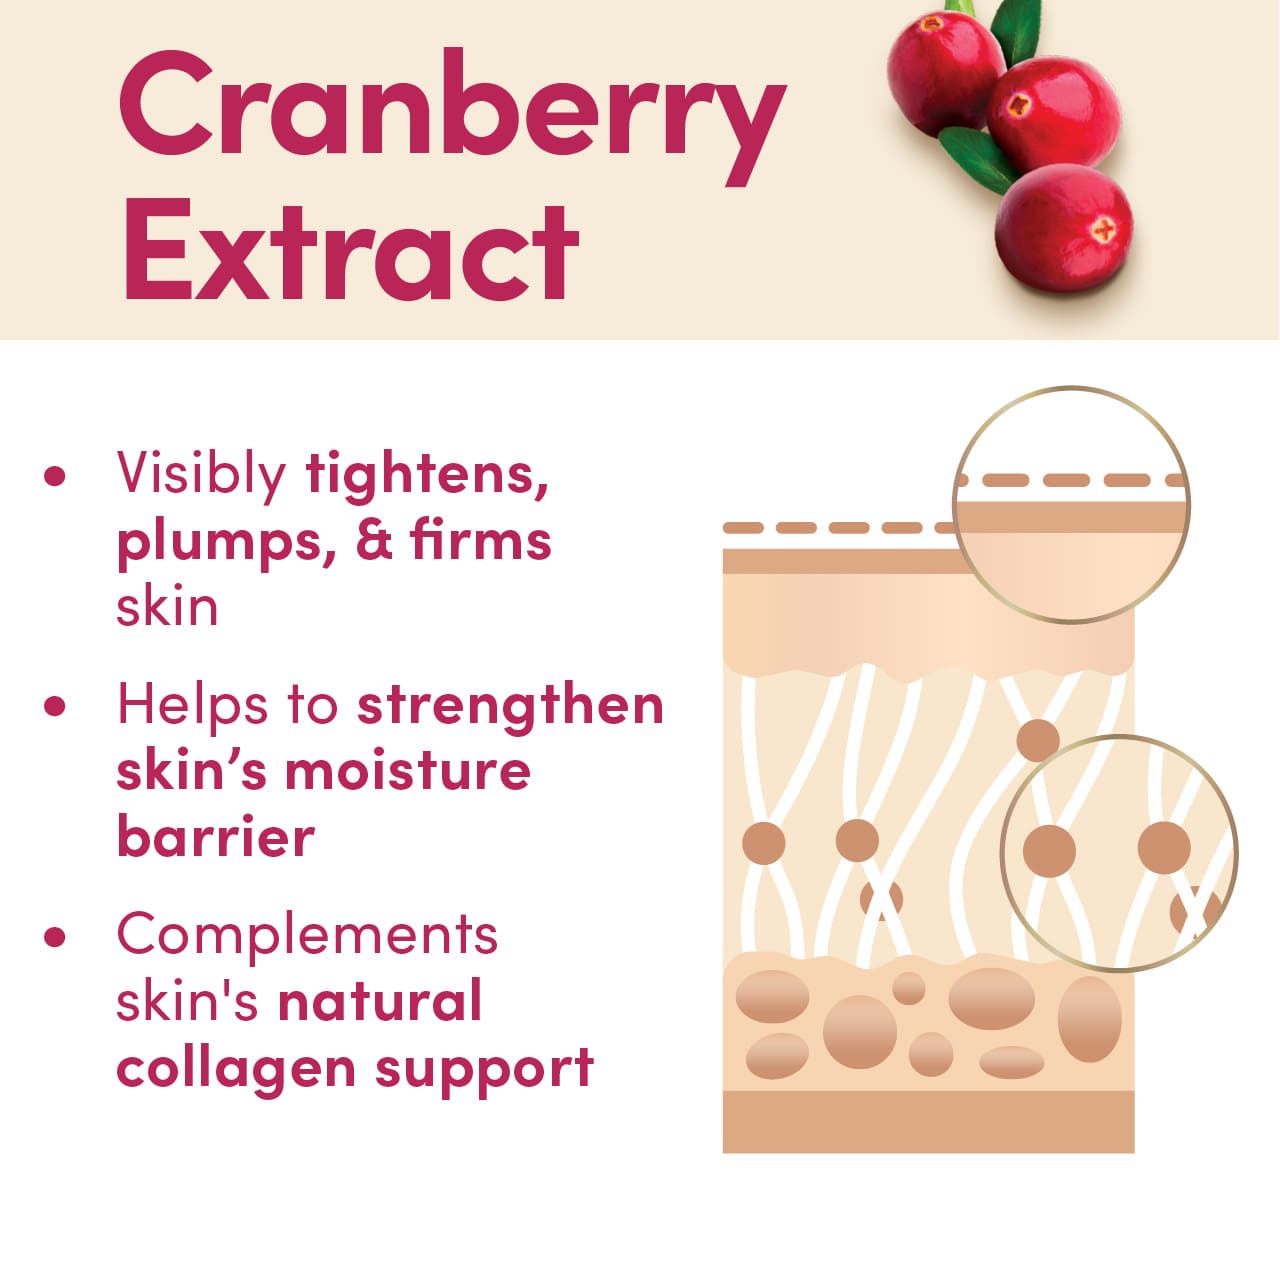 Skin benefits of cranberry extract as an ingredient